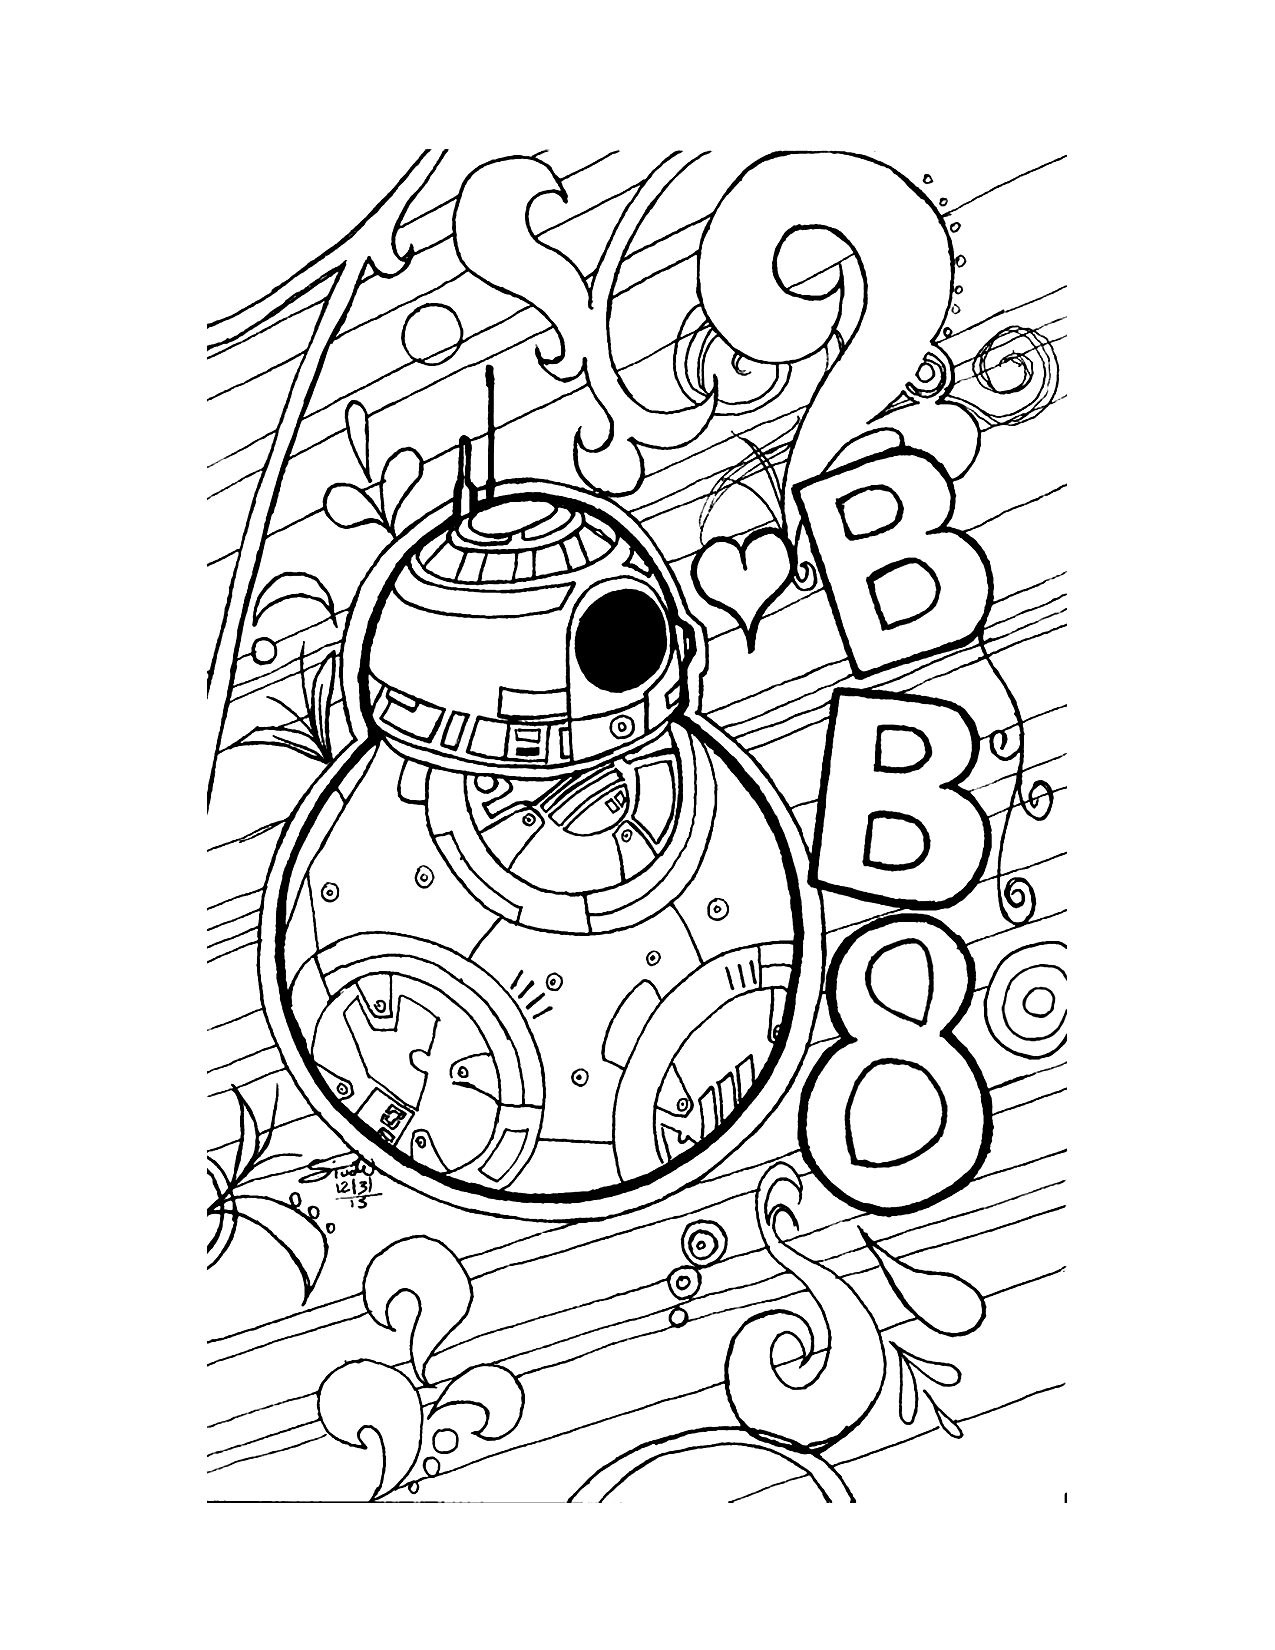 Decorative Bb8 Coloring Page